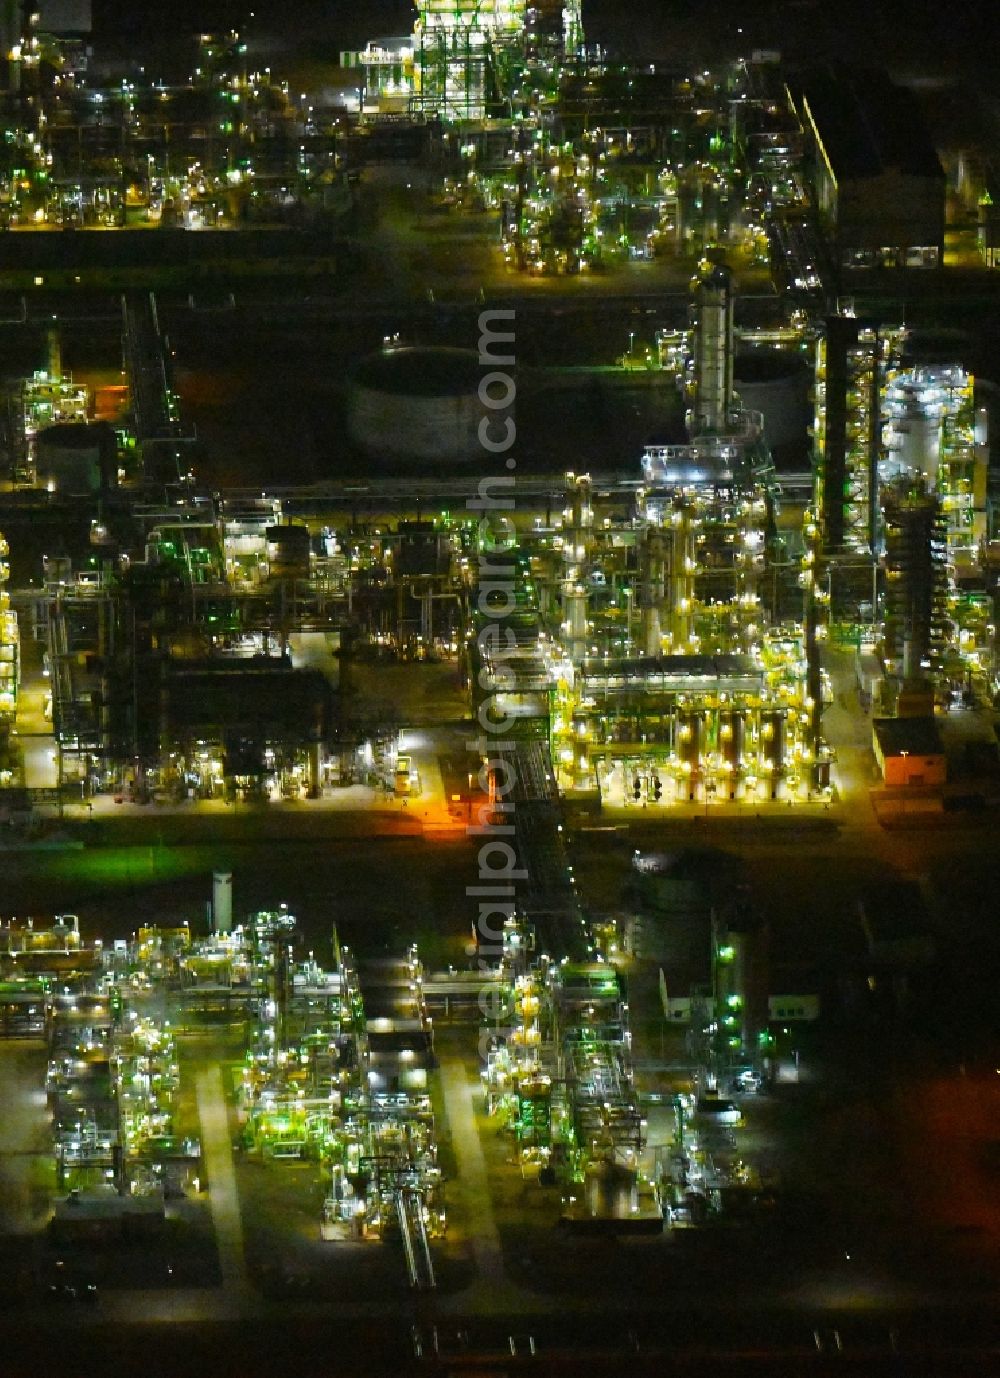 Schwedt/Oder at night from above - Night lighting Site of PCK Refinery GmbH, a petroleum processing plant in Schwedt / Oder in the northeast of the state of Brandenburg